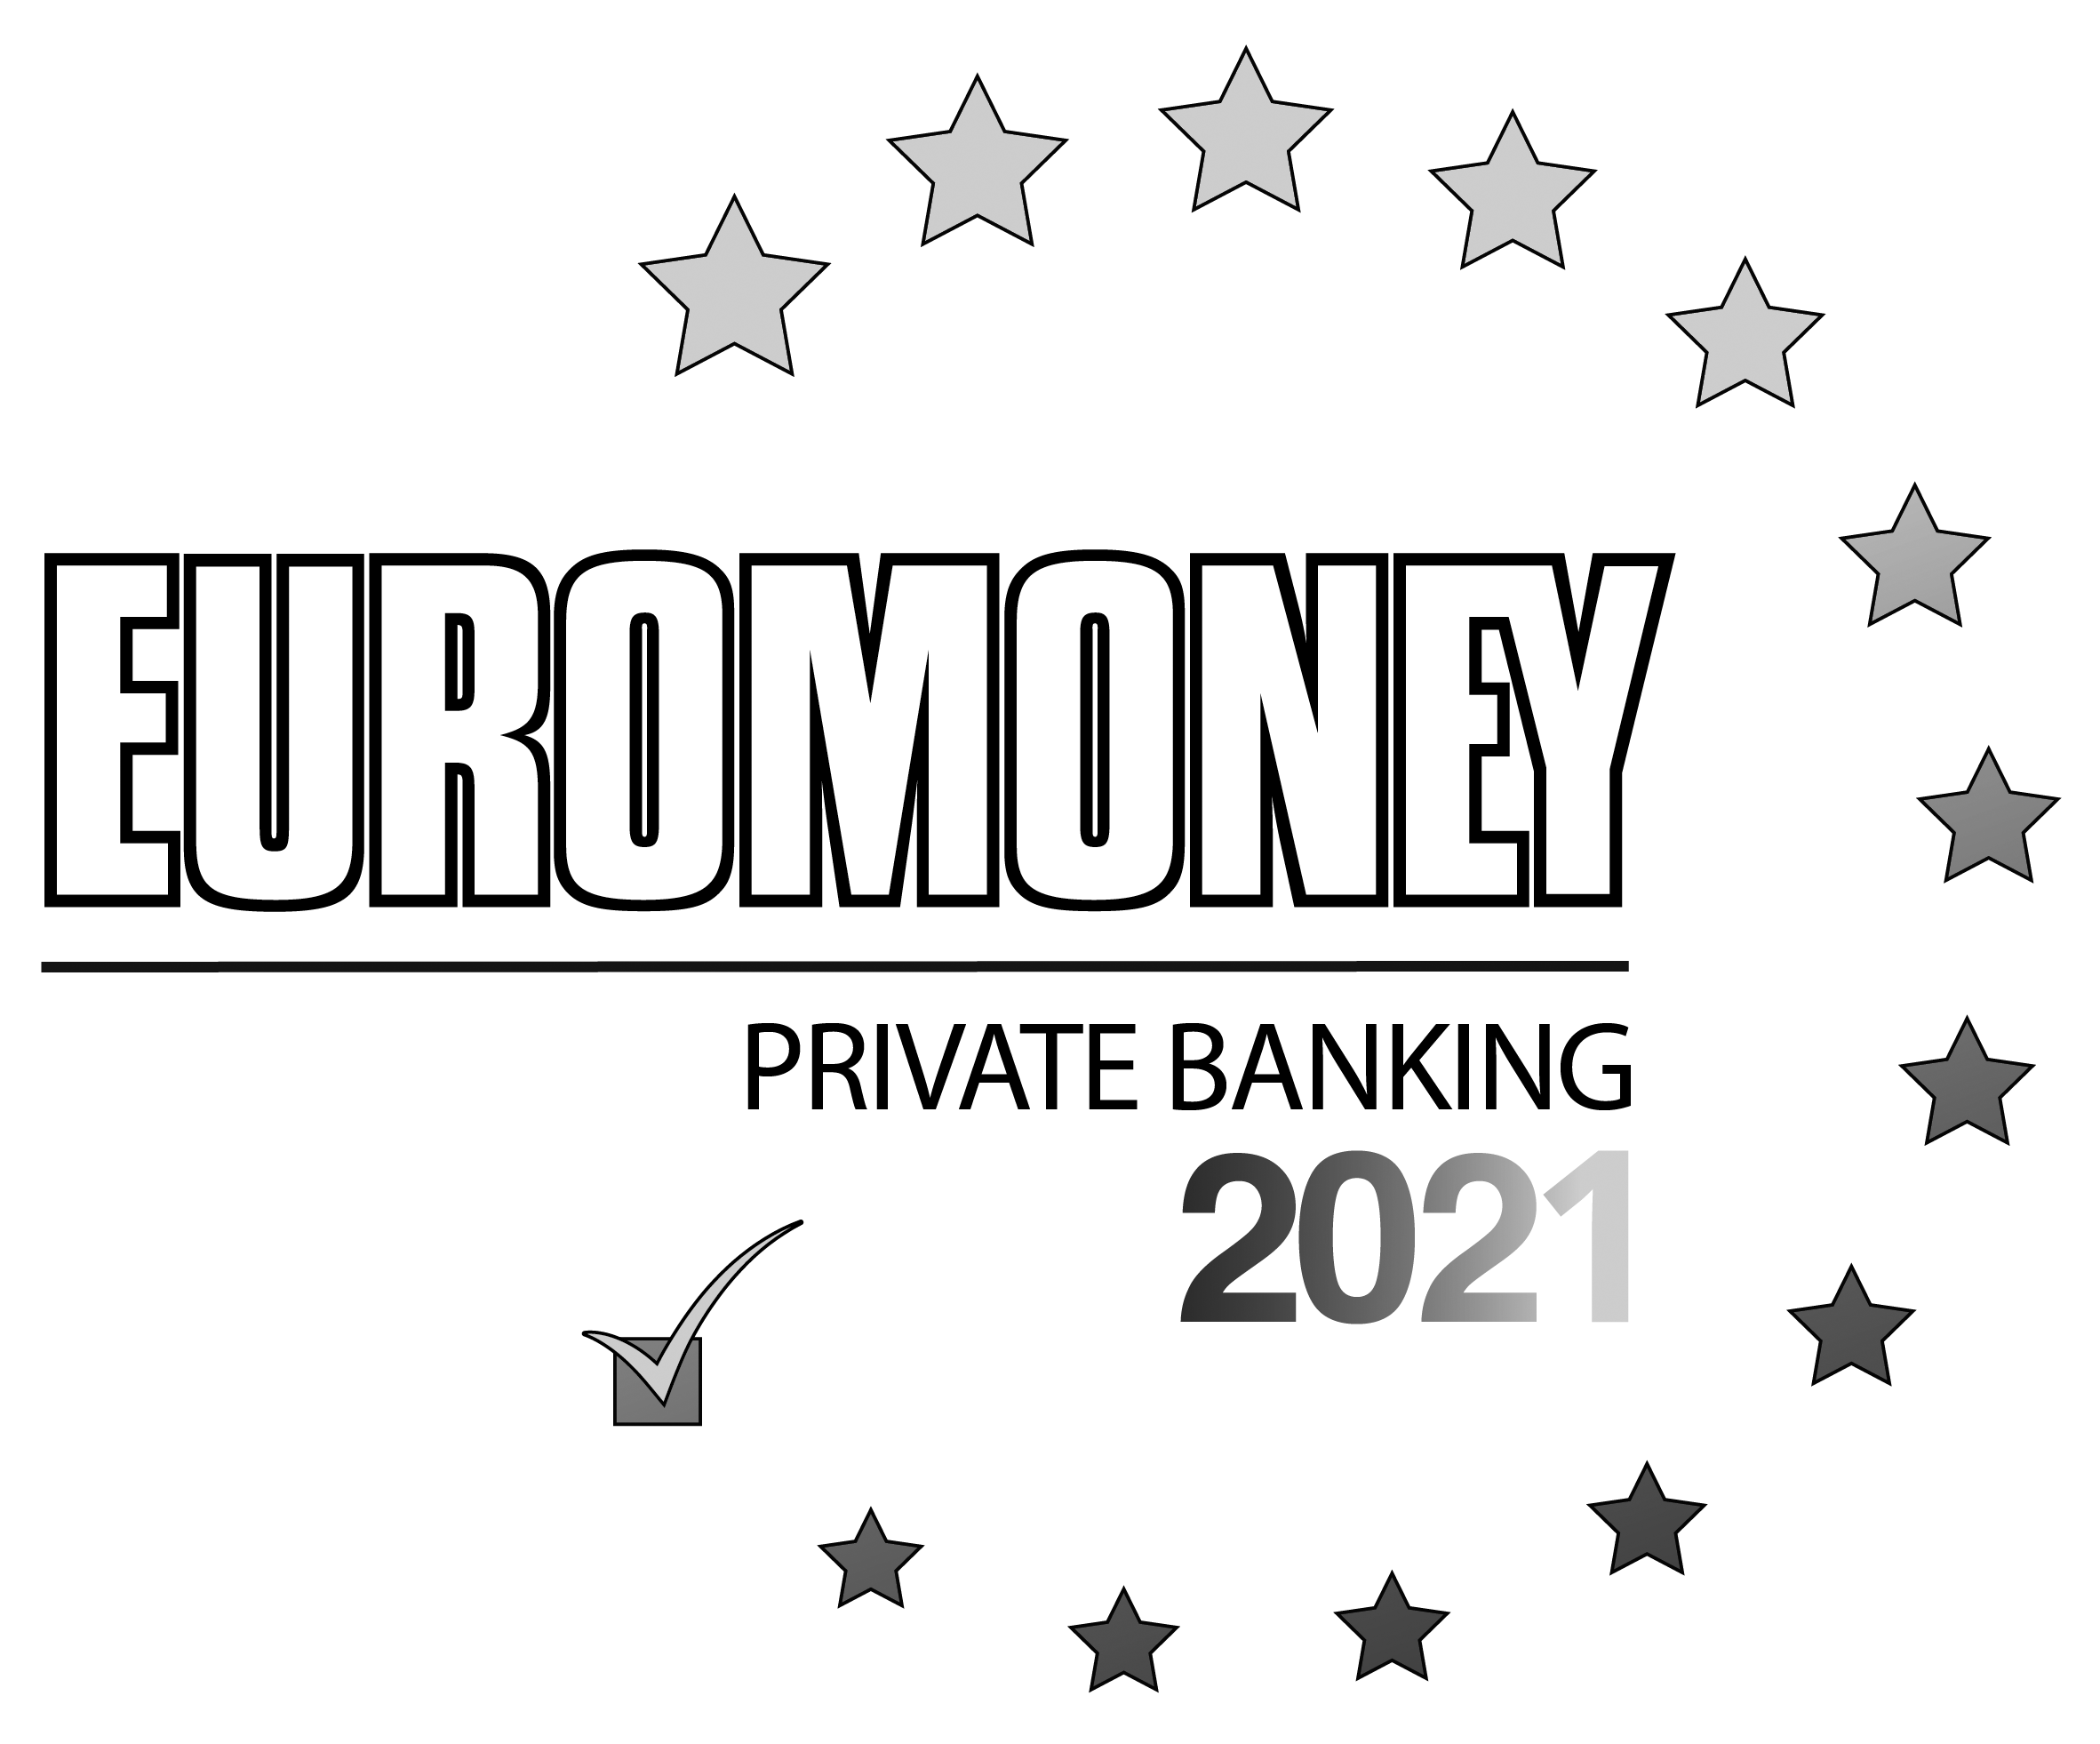 Euromoney Private Banking 2021